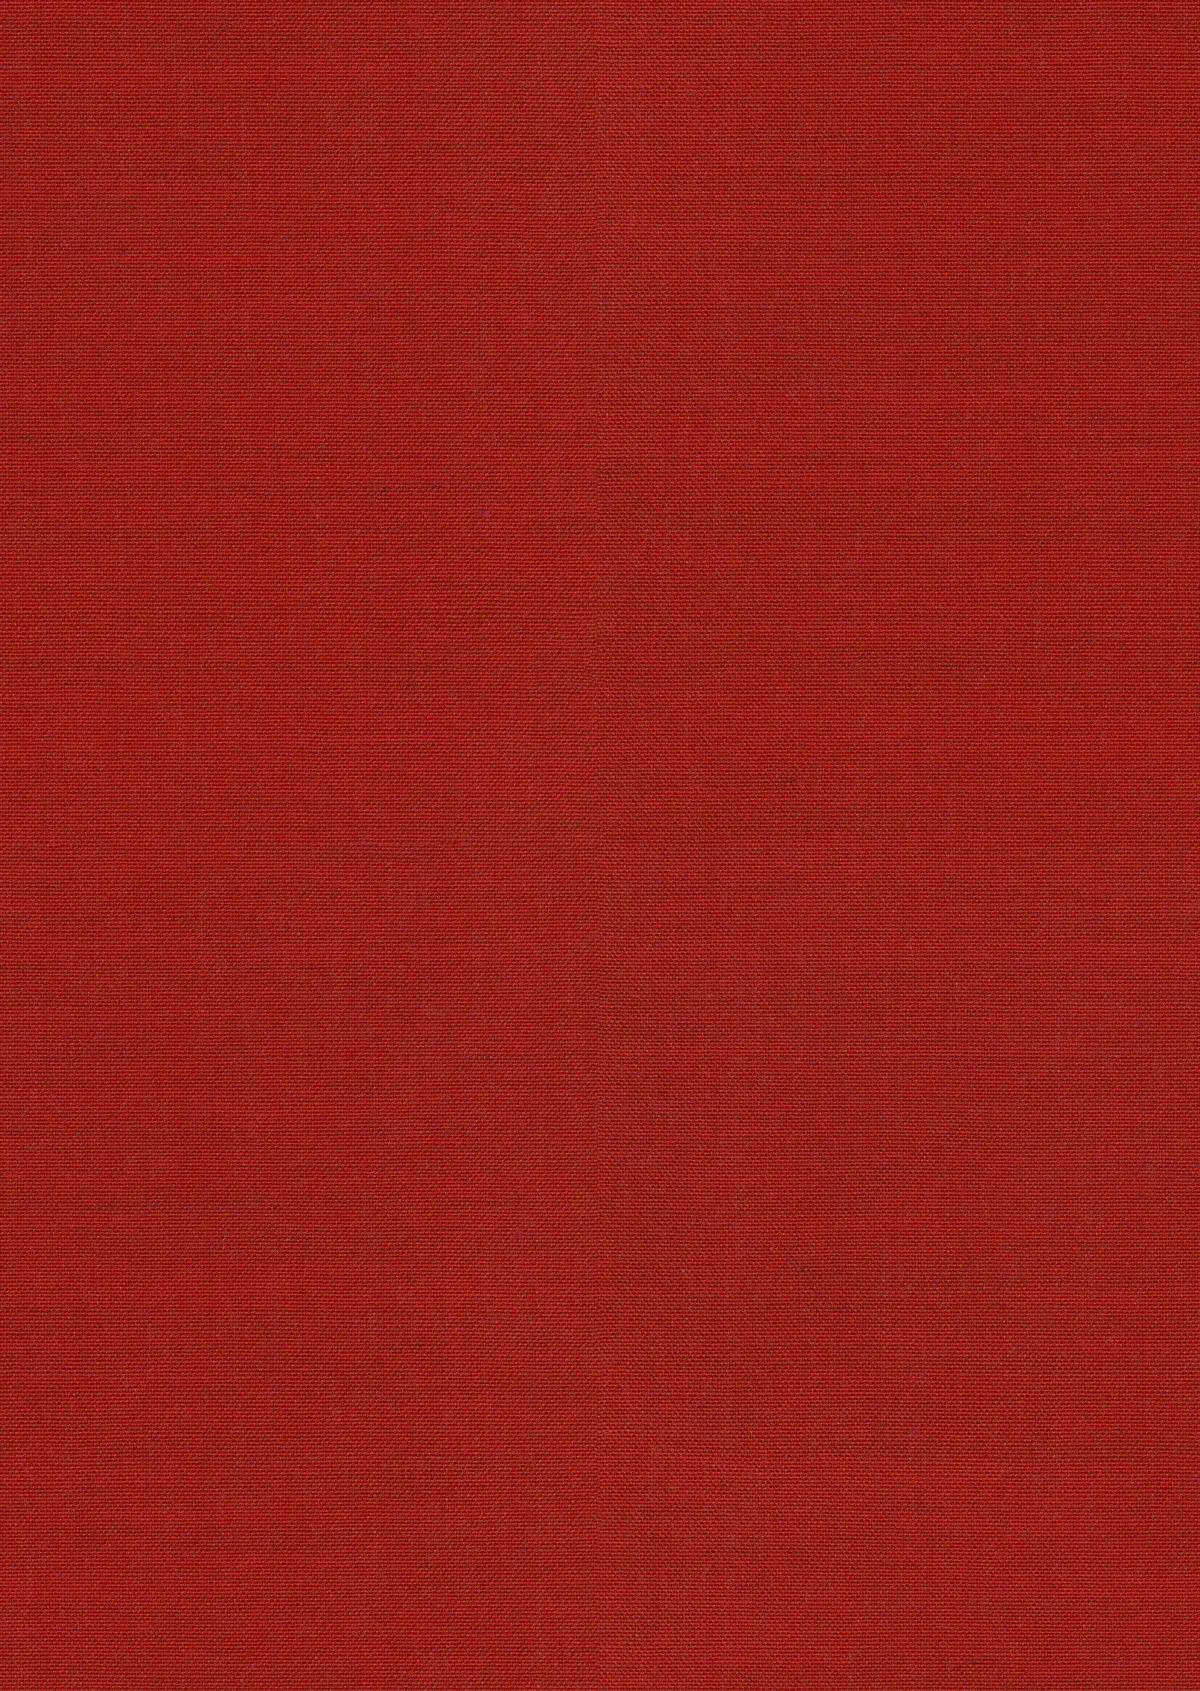 Fabric sample Remix 3 643 red